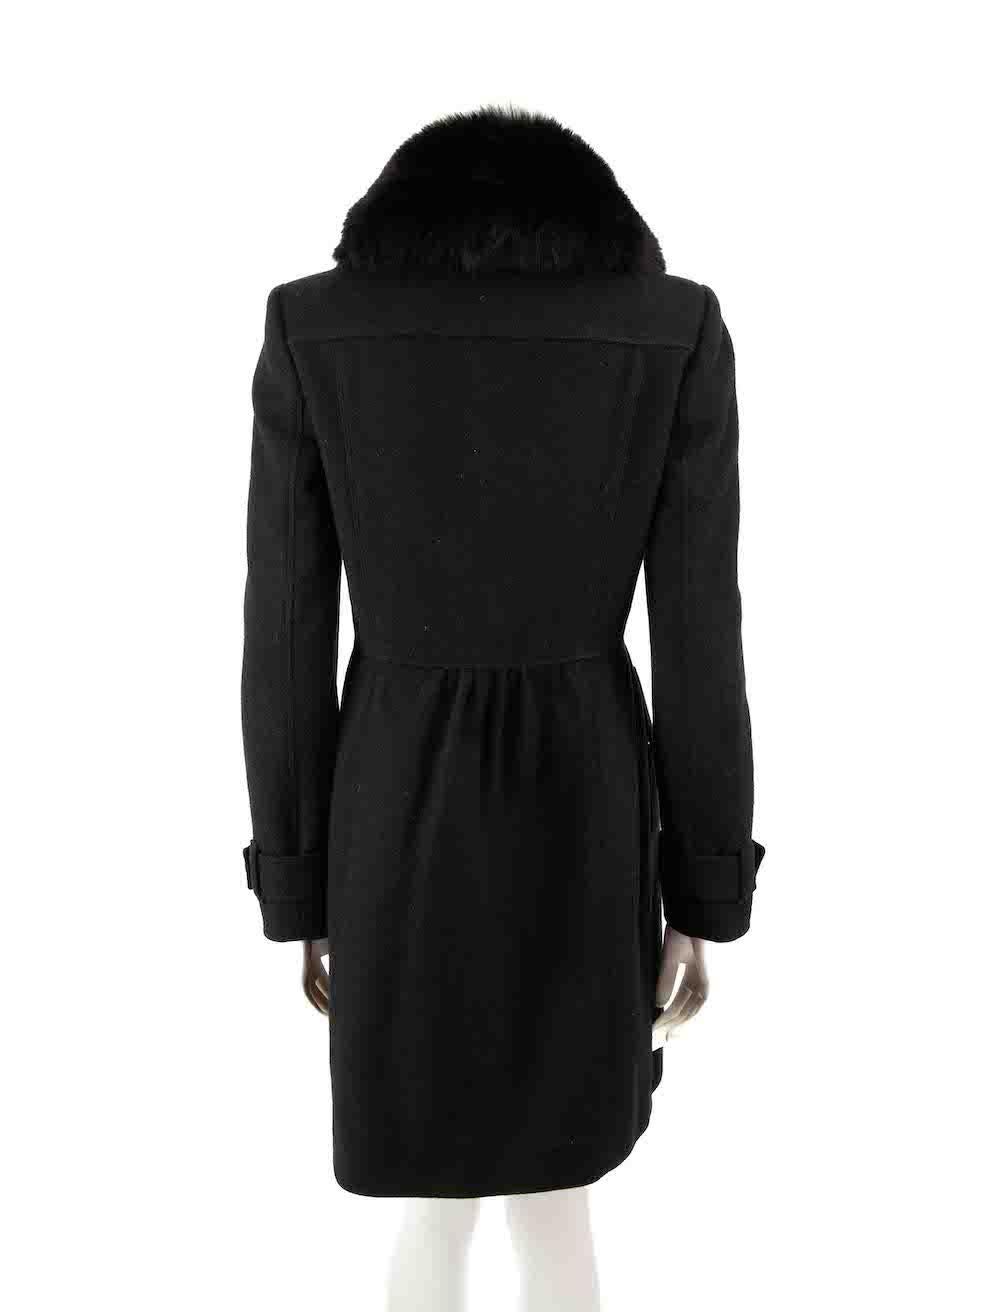 Burberry Black Wool Fur Trim Mid-Length Coat Size S In Good Condition For Sale In London, GB